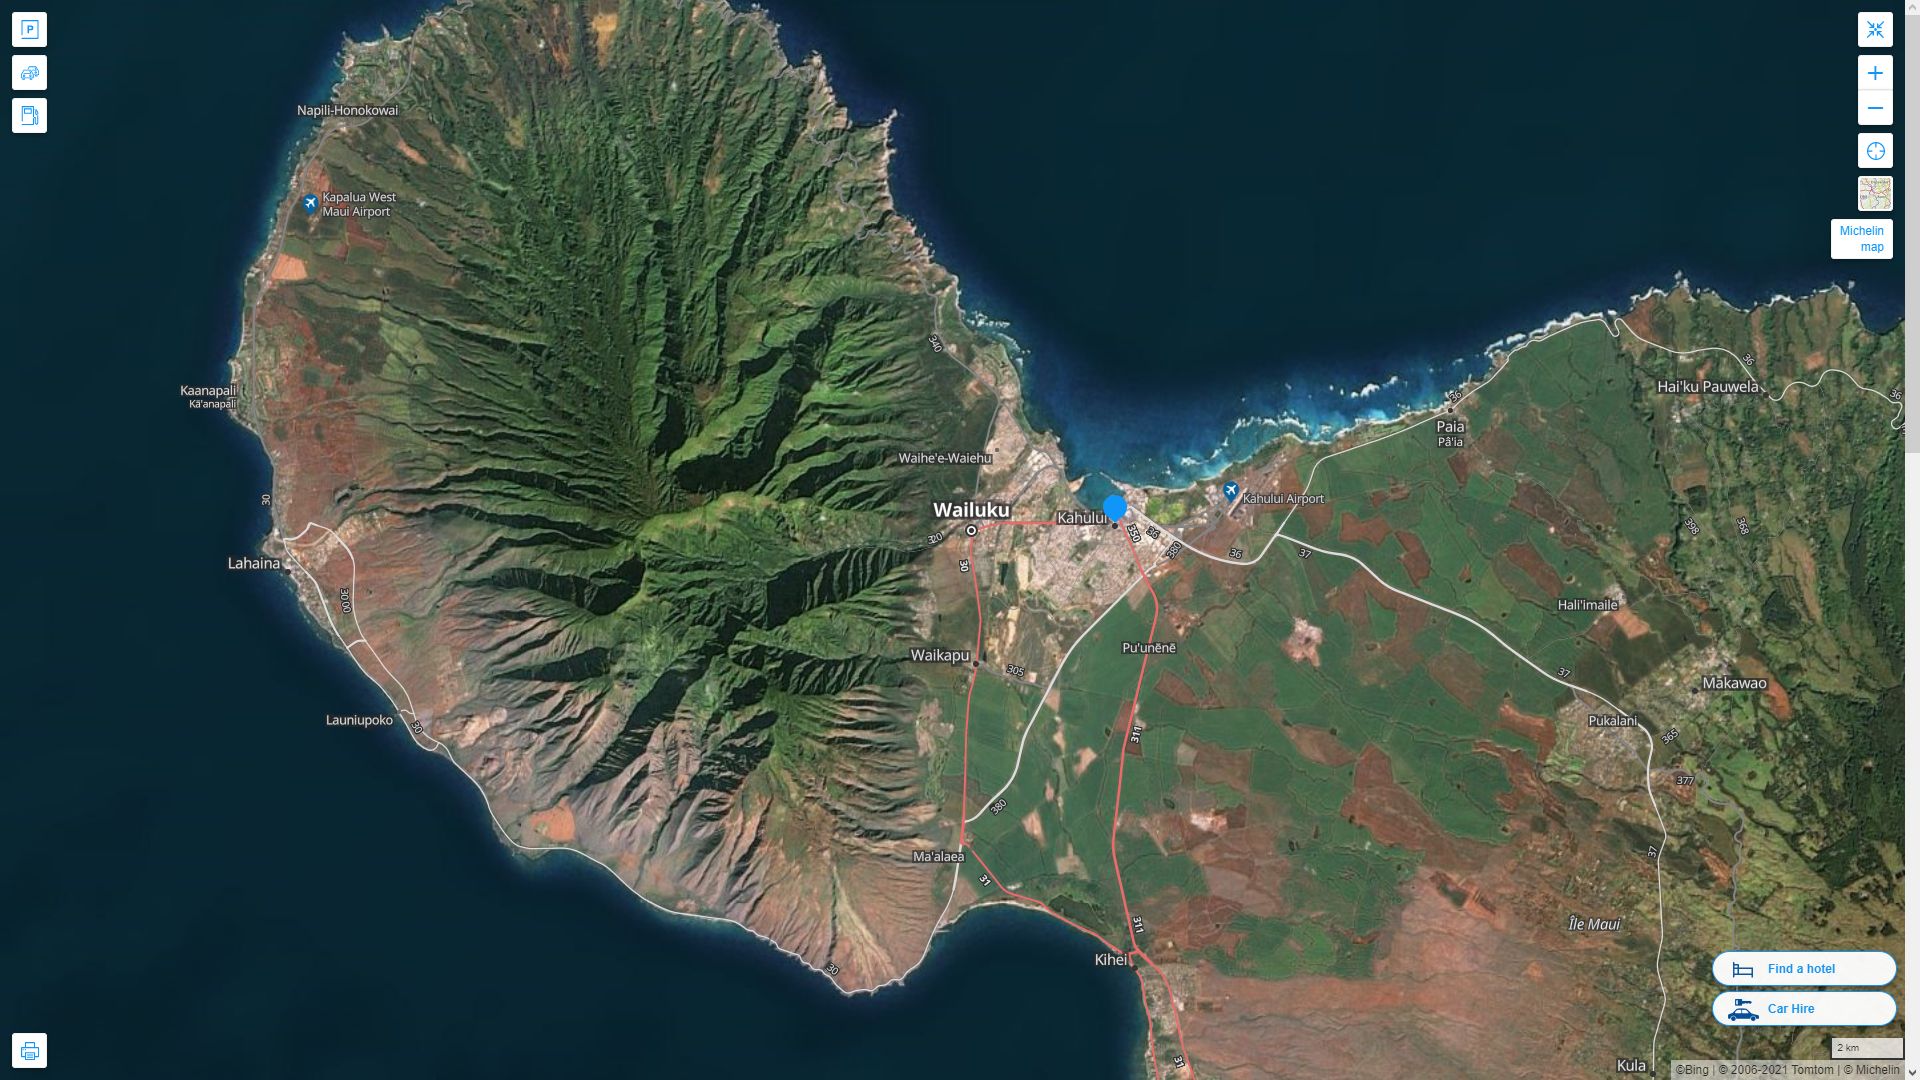 Kahului Hawaii Highway and Road Map with Satellite View